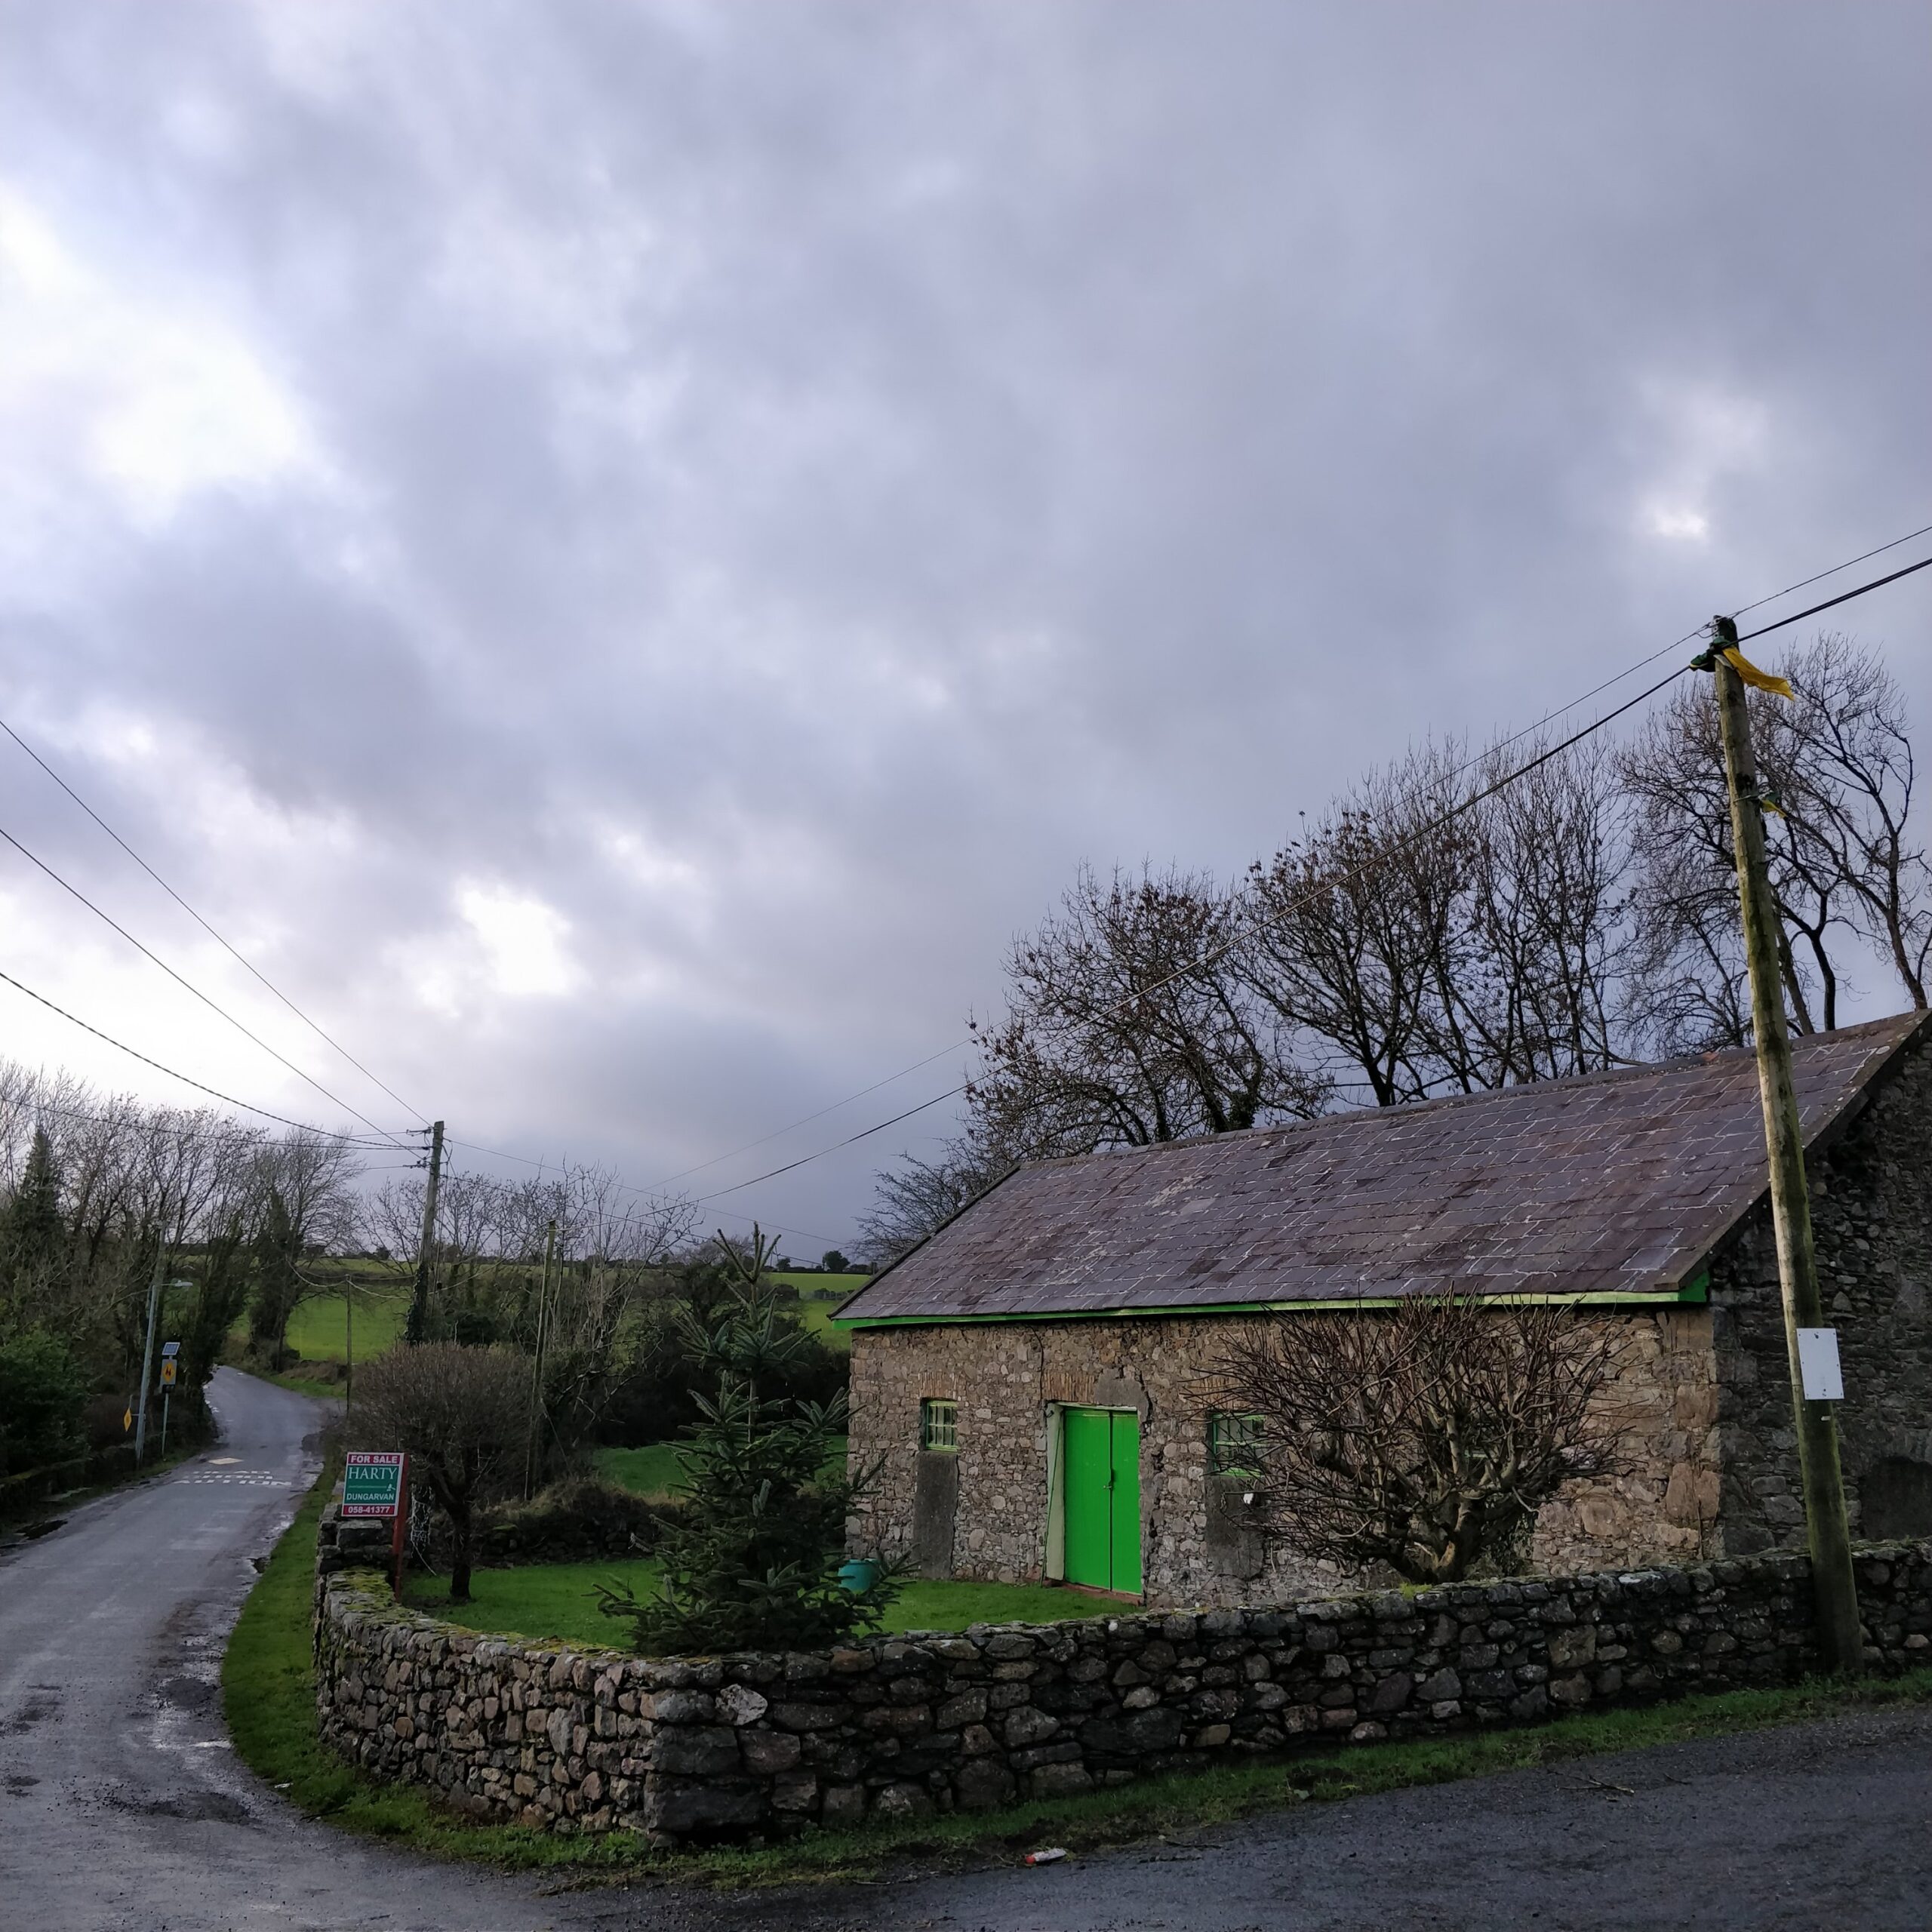 Shed with green door, Fews, County Waterford